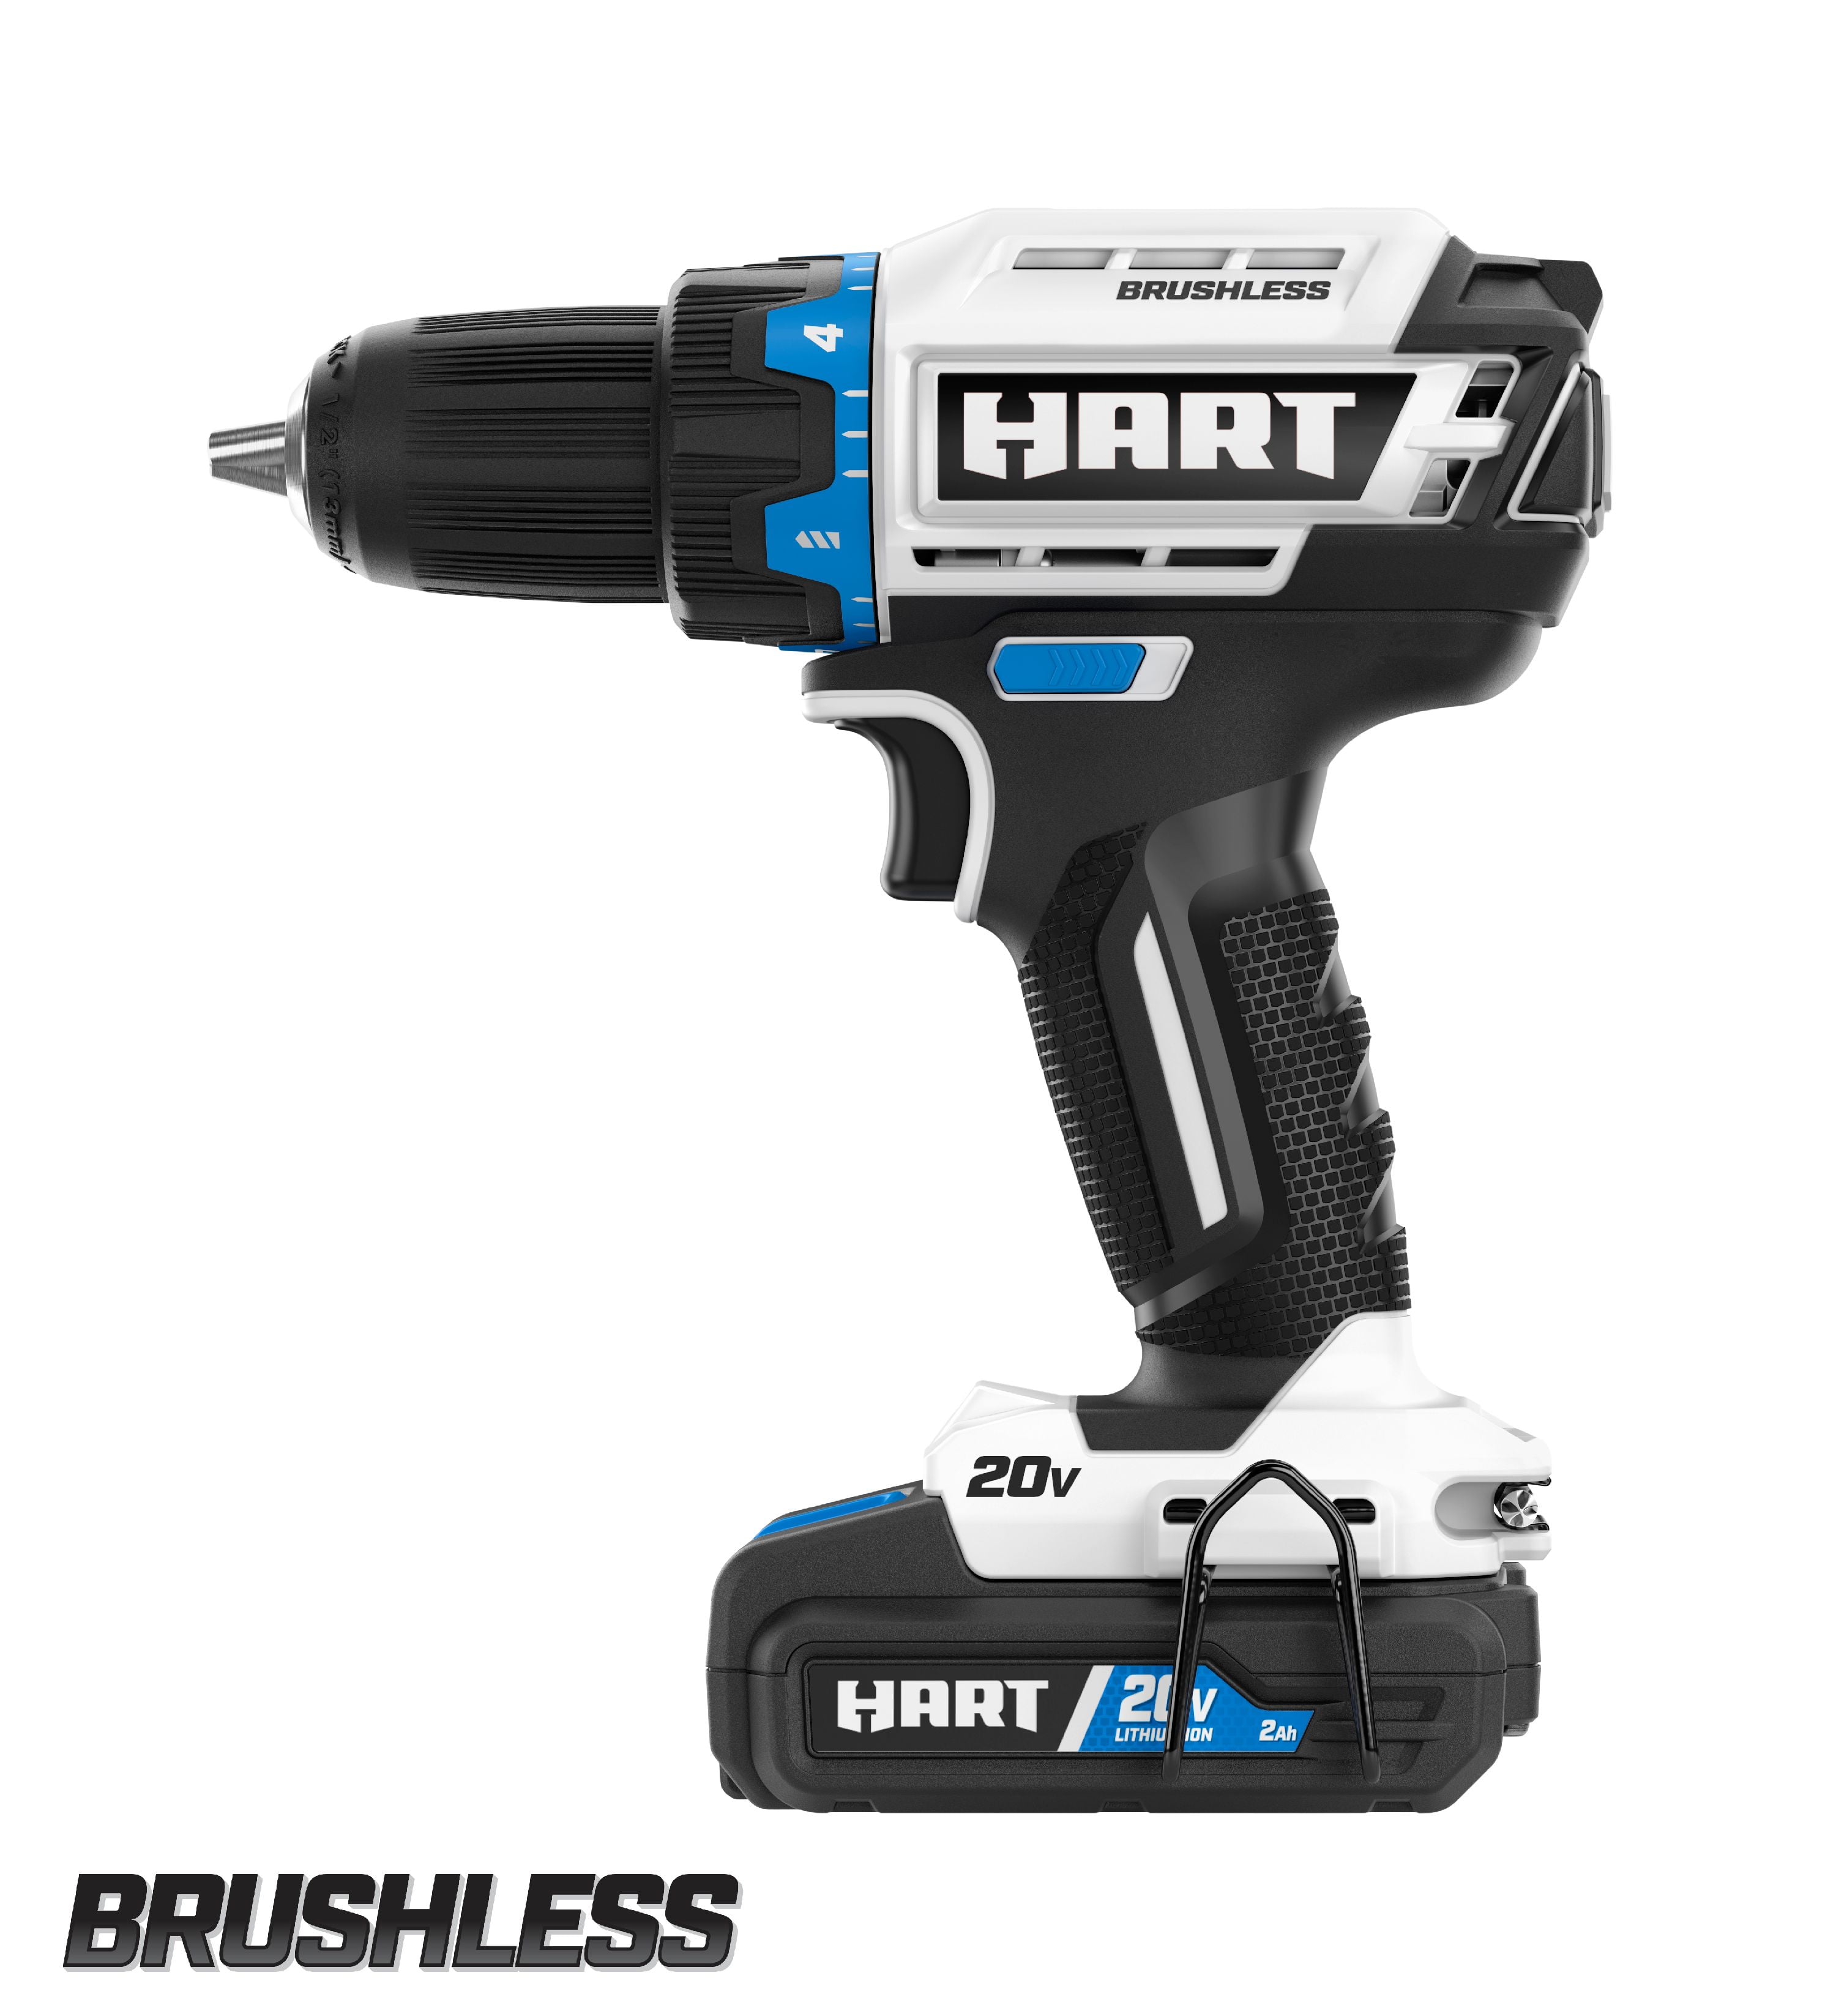 HART Brushless 1/2-inch Drill/Driver (Battery not Included) $26.96 Walmart.com